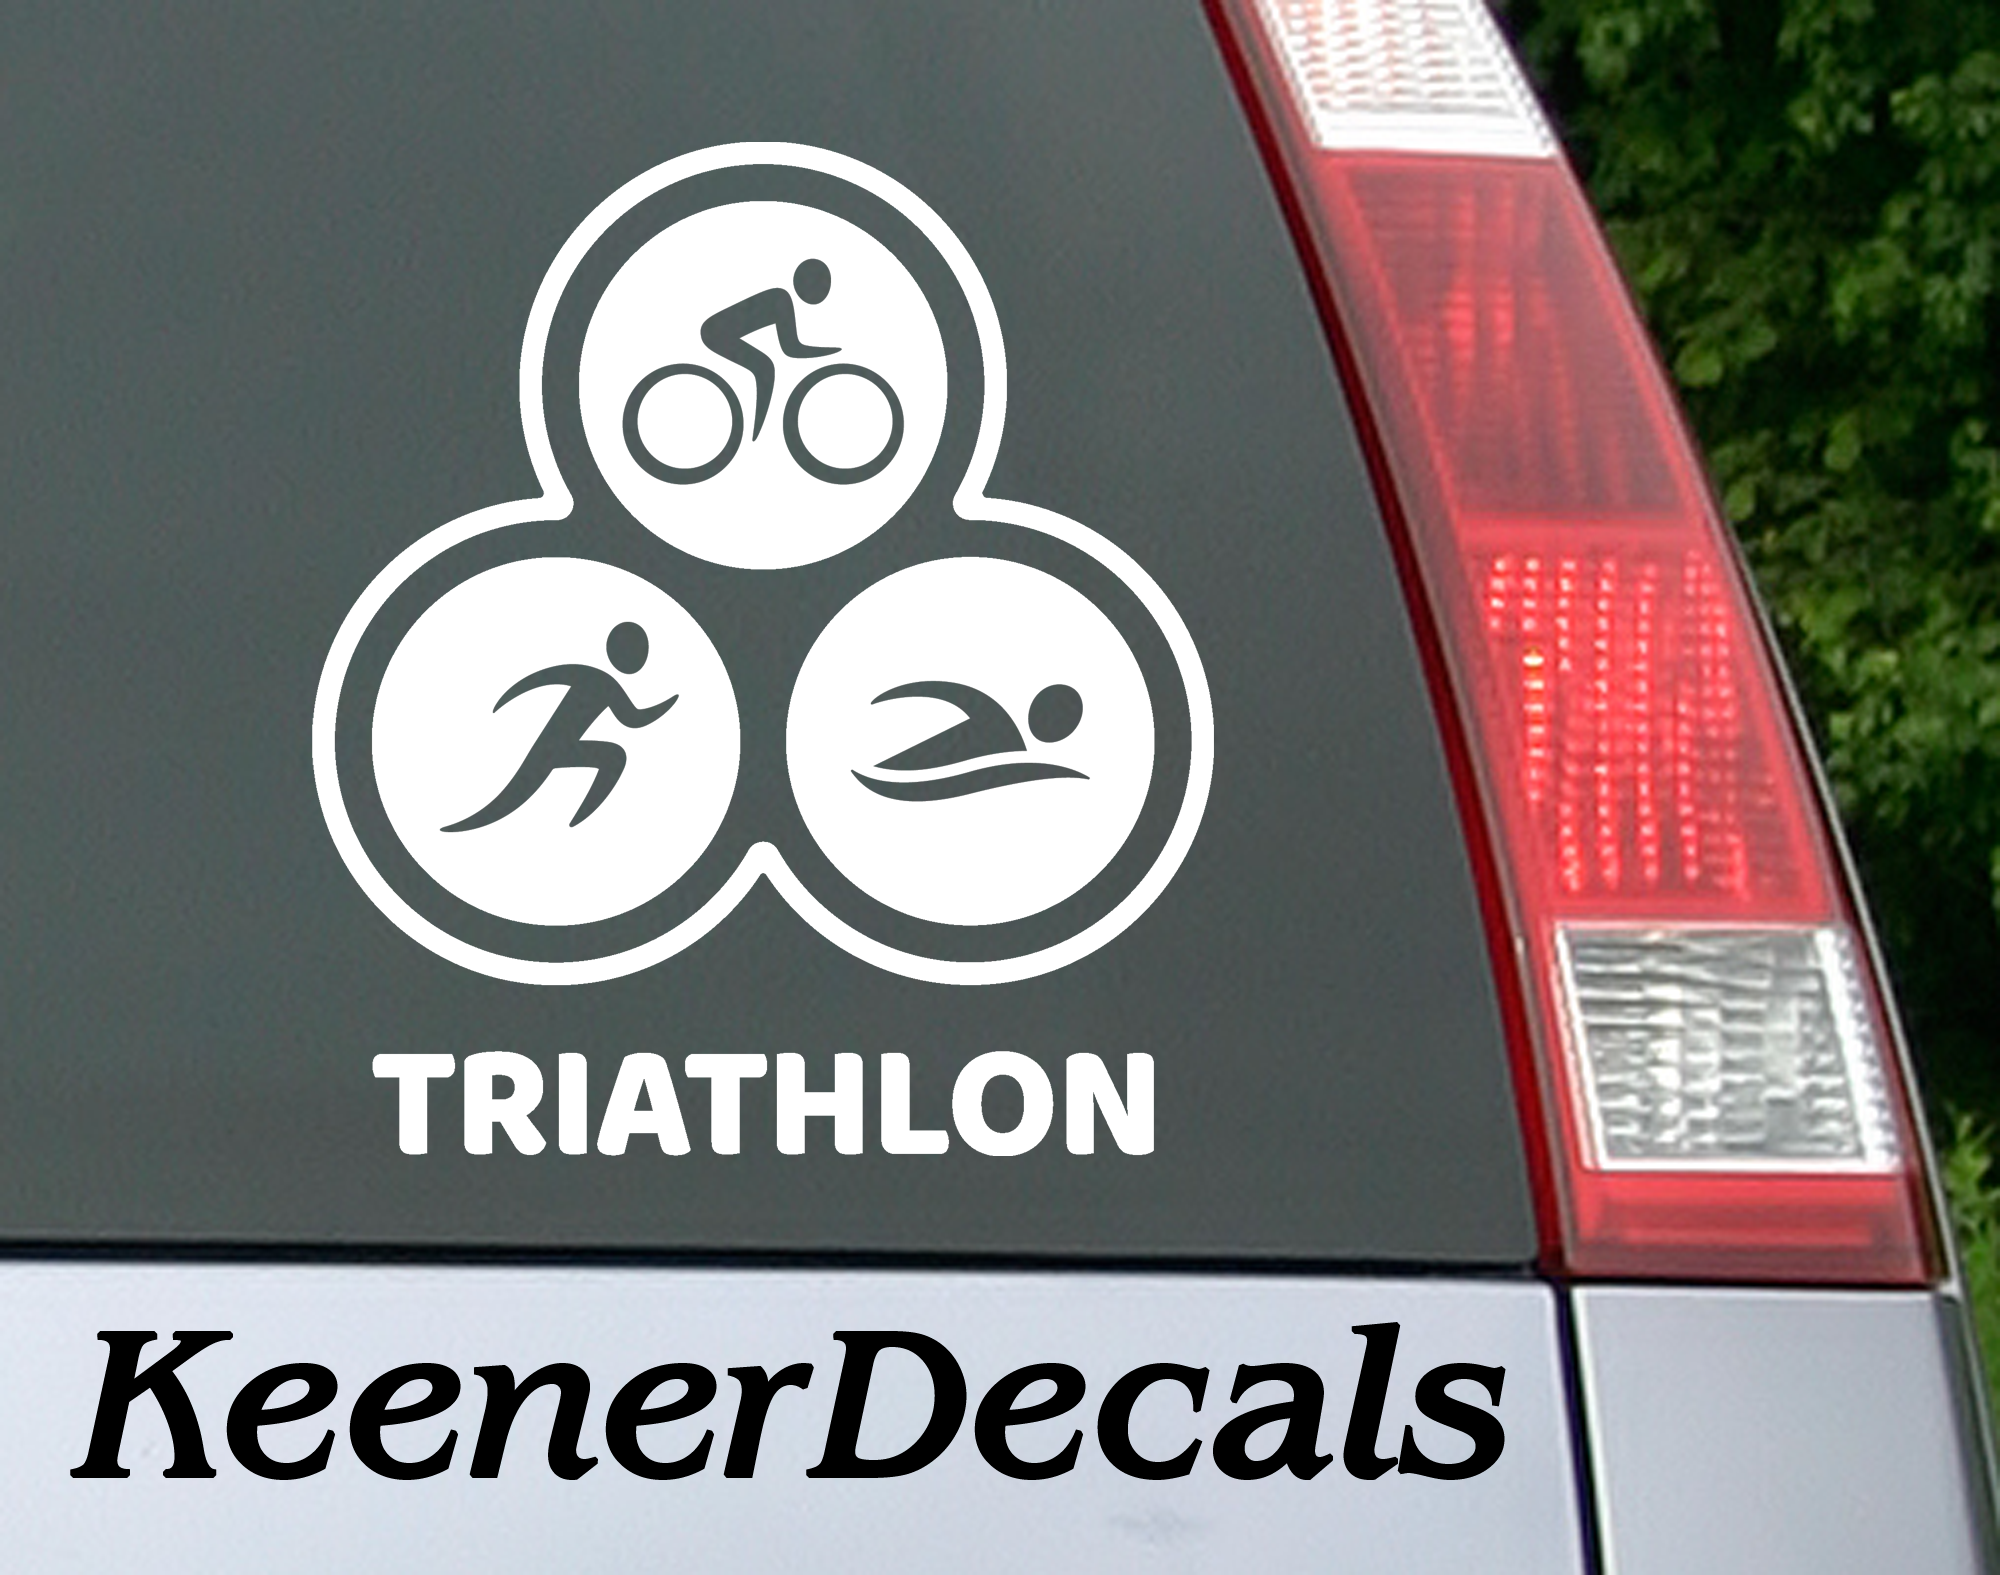 Triathlon - Car Vinyl Decal Bumper Sticker. Display your trophy on your car, you've earned it.  5.5"W x 6.2"H Car Decal, Car Sticker, Car Vinyl, Bumper Sticker, Vinyl Stickers, Vinyl Sticker.  FREE SHIPPING FOR ALL VINYL DECALS within Canada